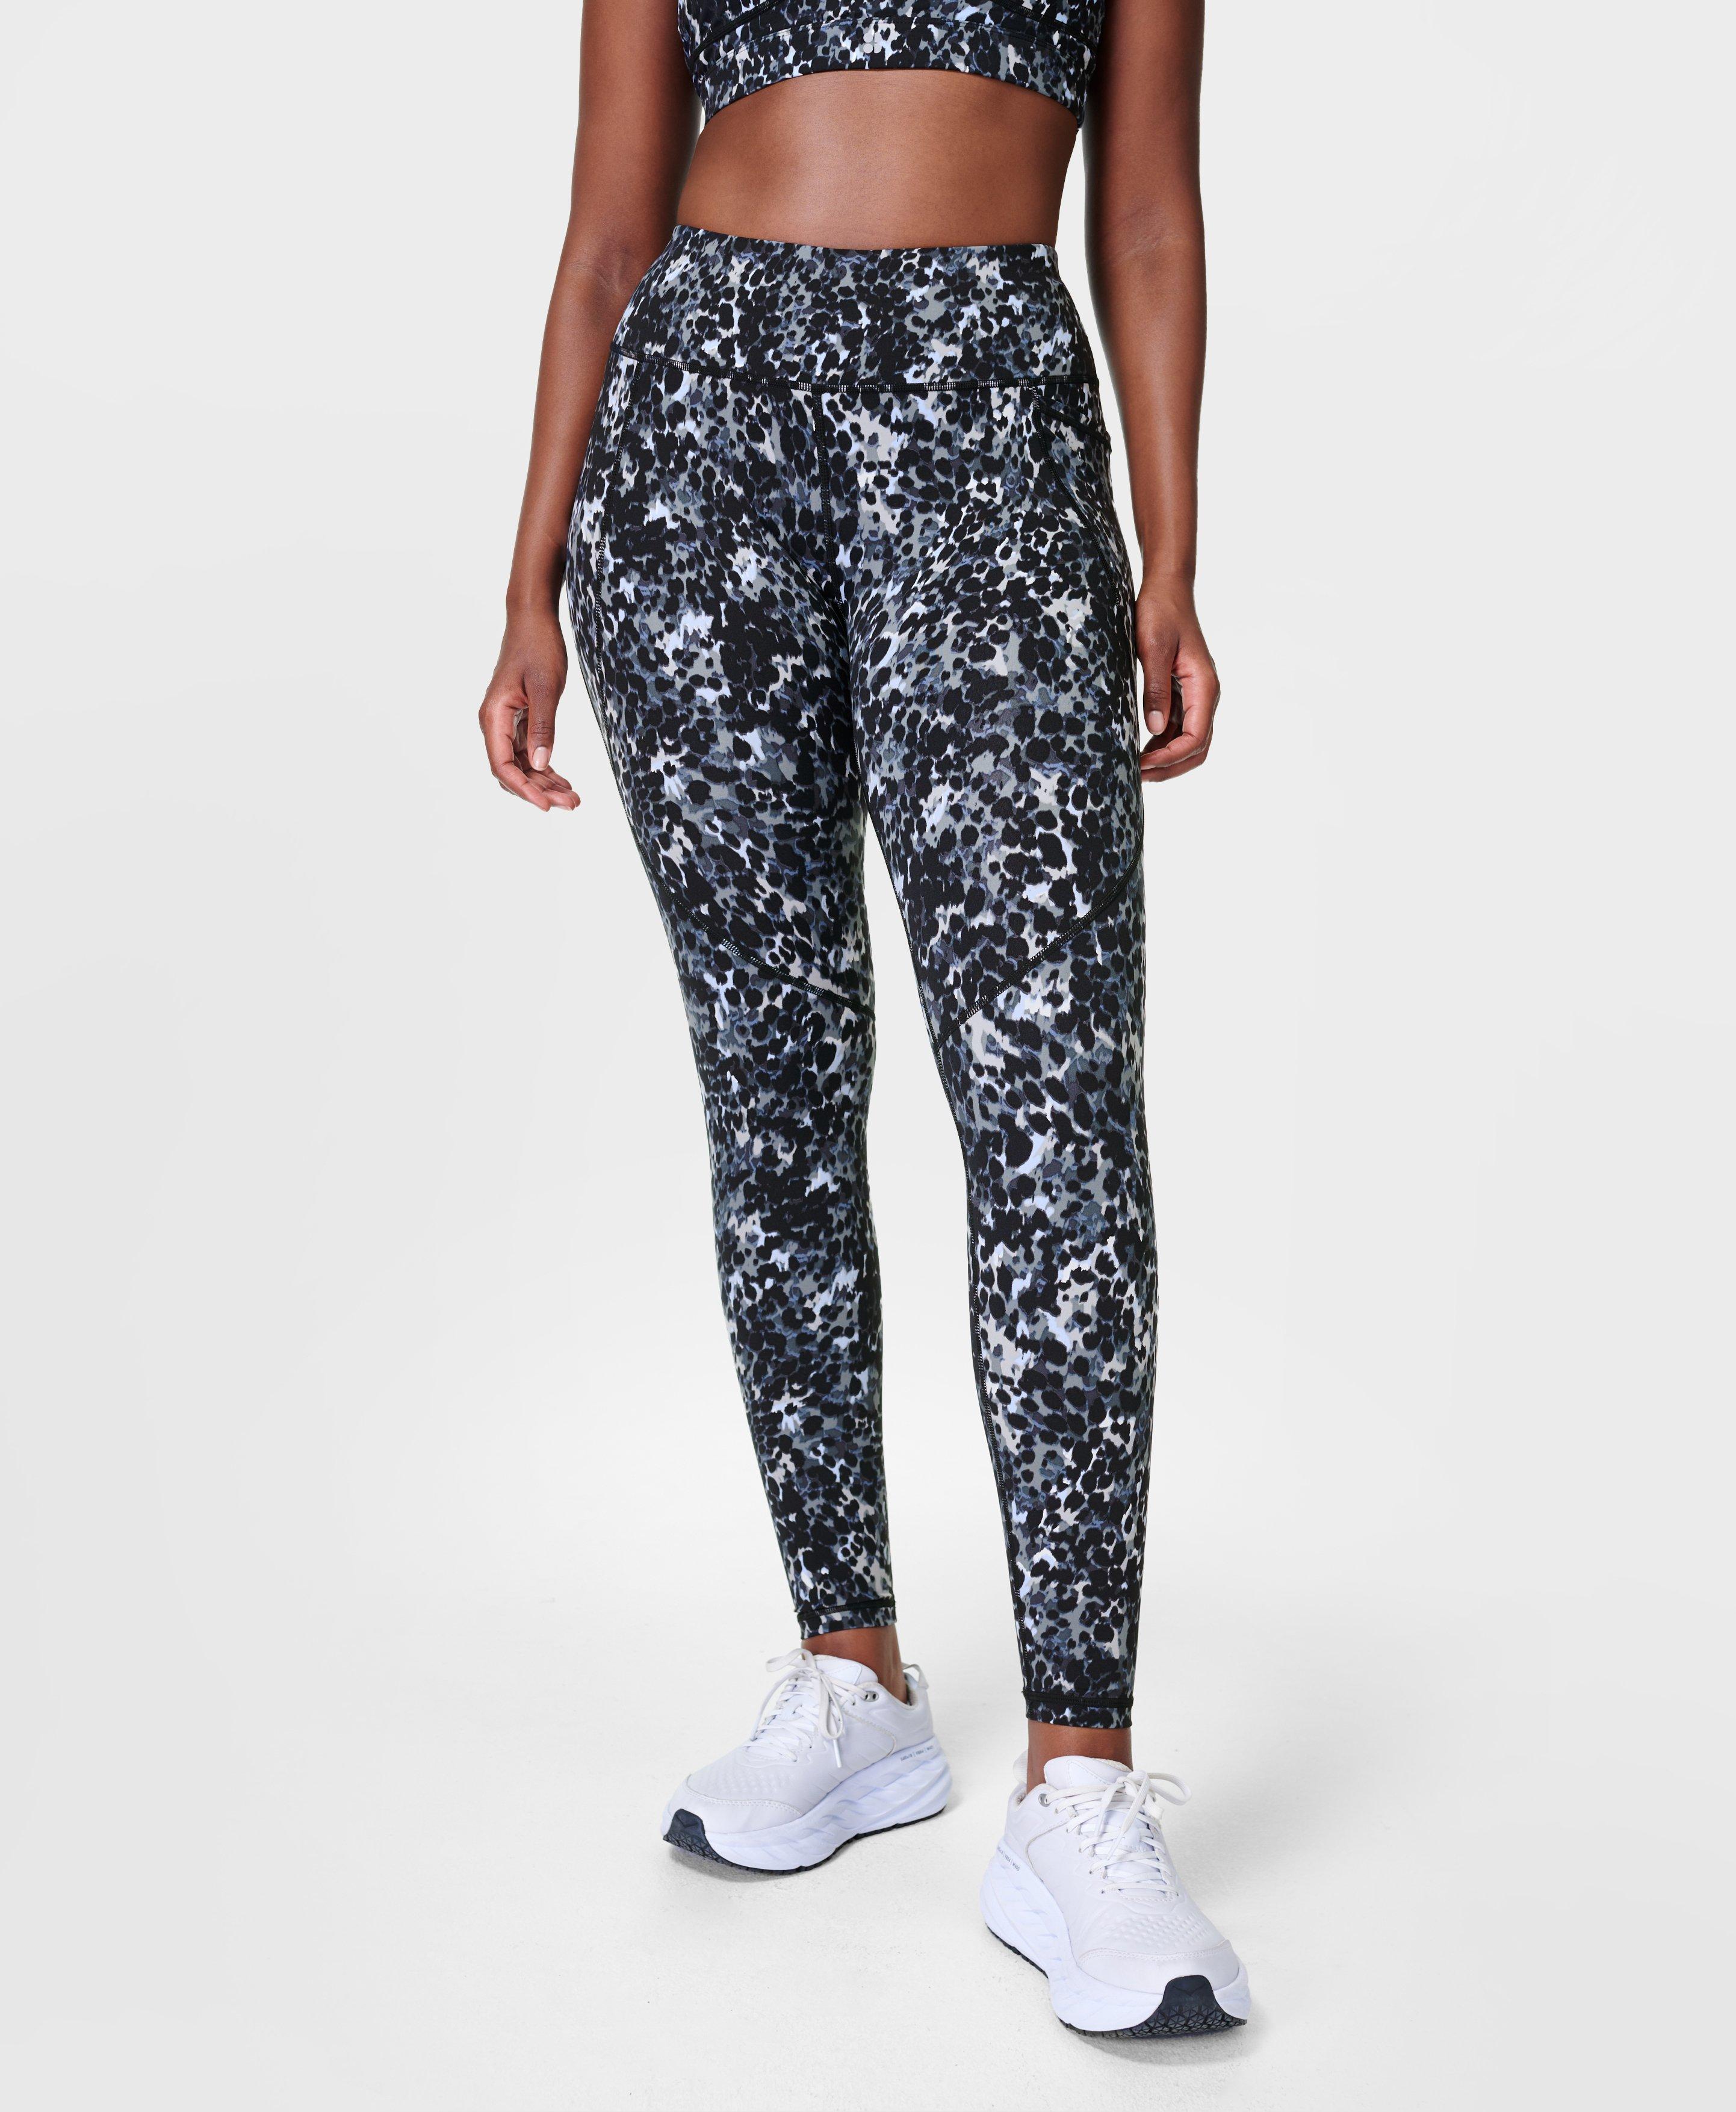 Sweaty Betty All Day floral full length print grey leggings Size XS - $45 -  From Rebecca